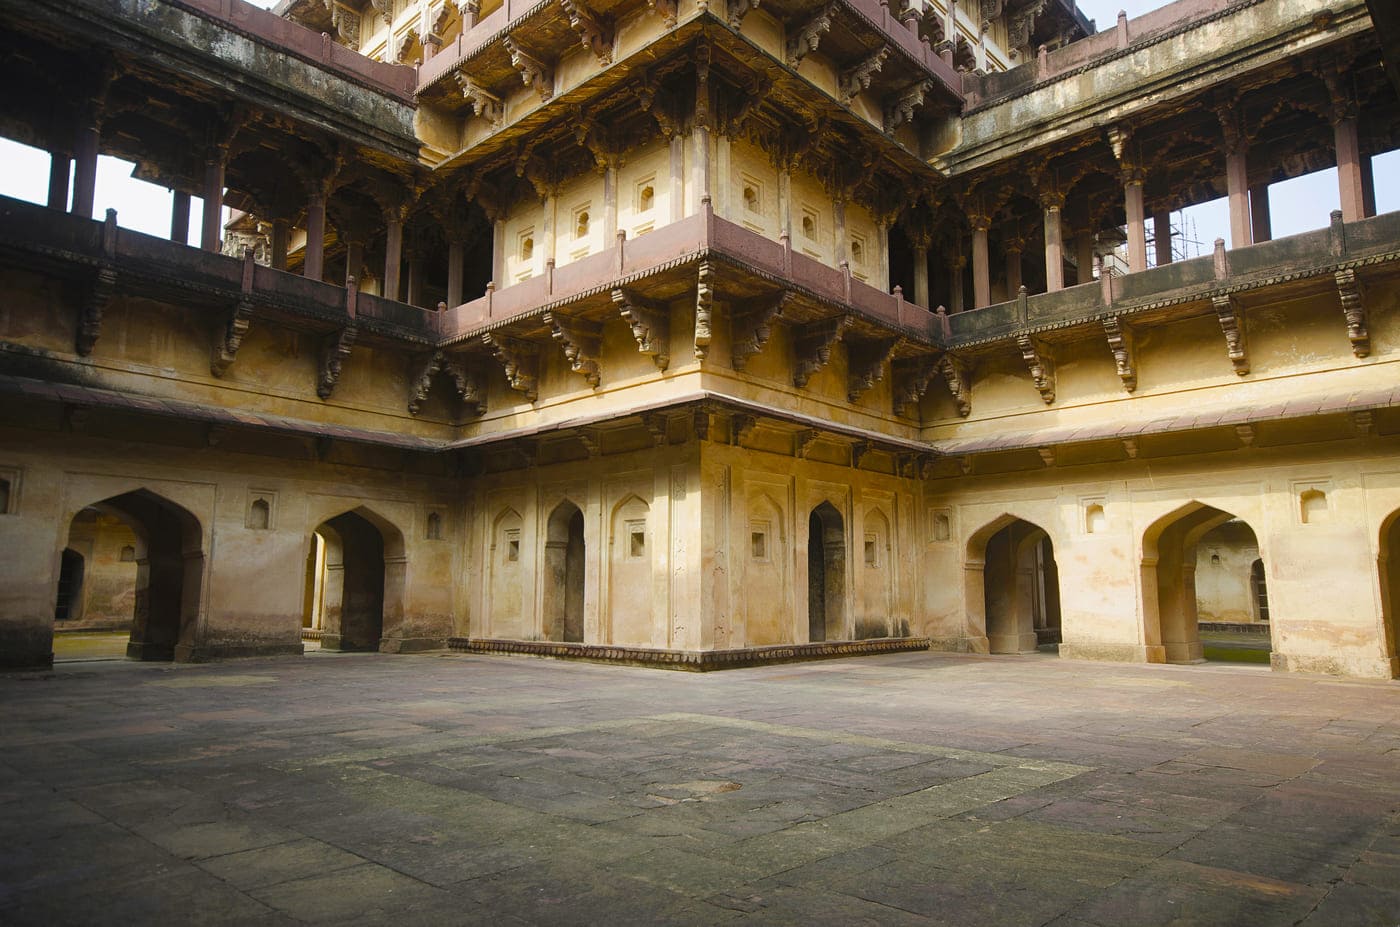 The courtyard of the Datia Palace looks at the two storeyed passageways that take one across the palace with over 440 rooms, Madhya Pradesh 